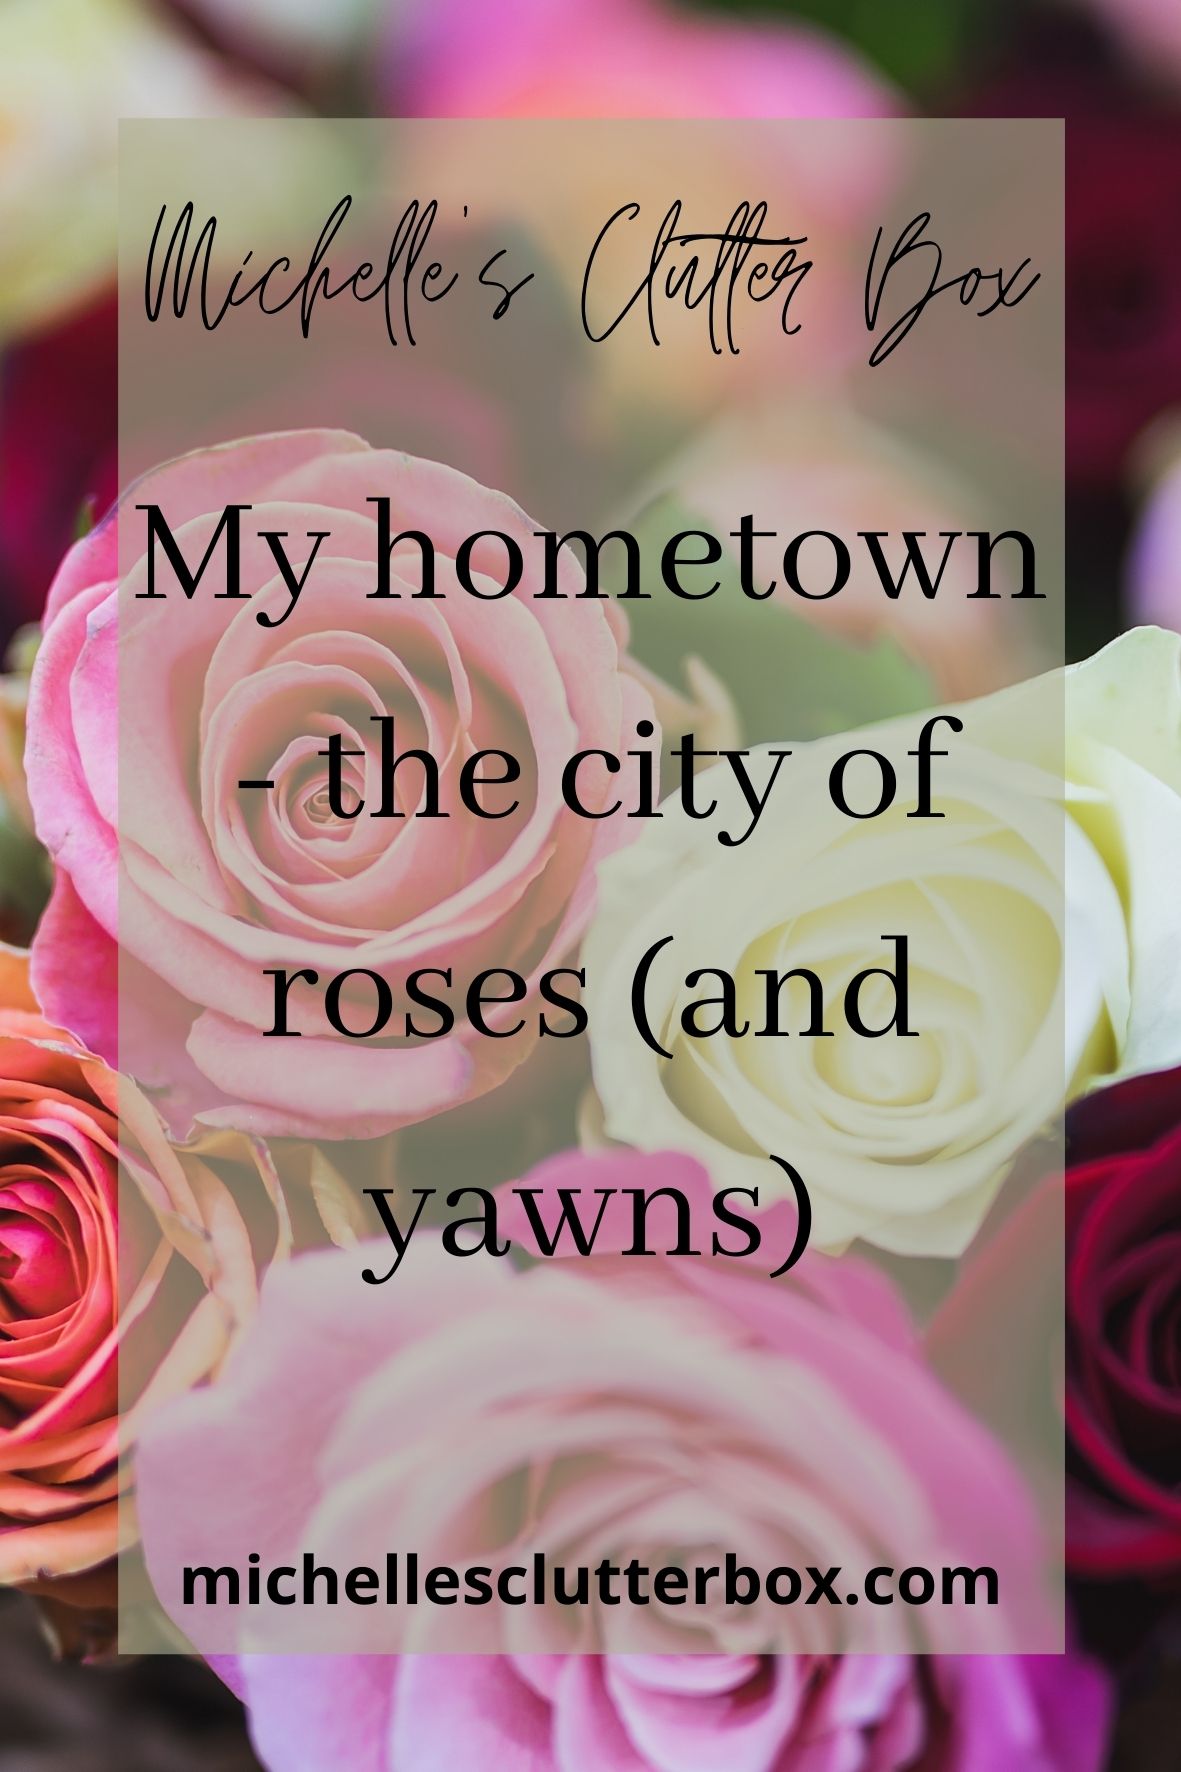 My hometown - the city of roses